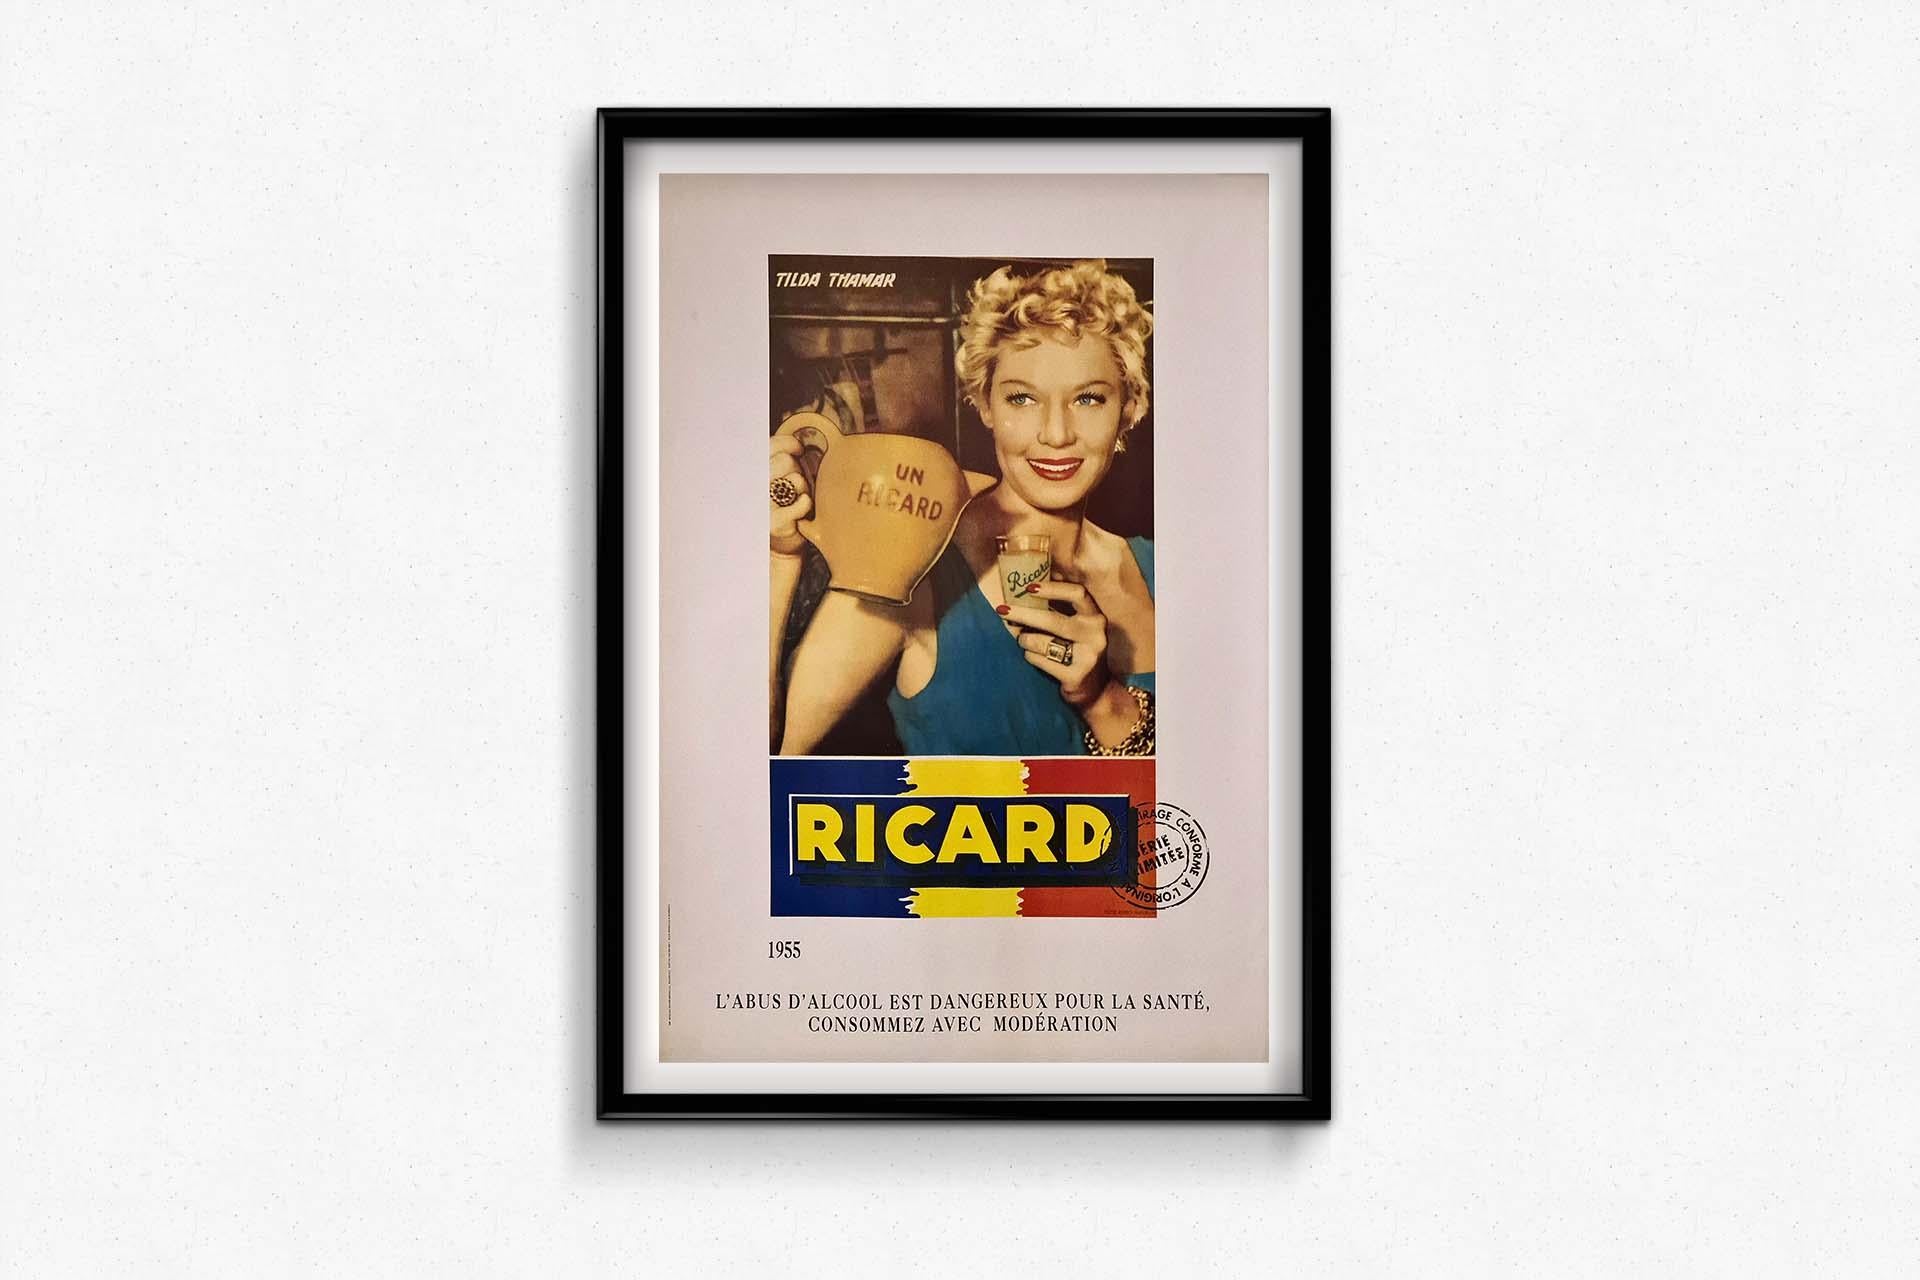 The 1955 original advertising poster featuring Tilda Thamar promotes Ricard, a well-known brand of pastis. Thamar, a renowned Argentine actress, dancer, and singer, adds allure and sophistication to the advertisement. Her elegant presence suggests a